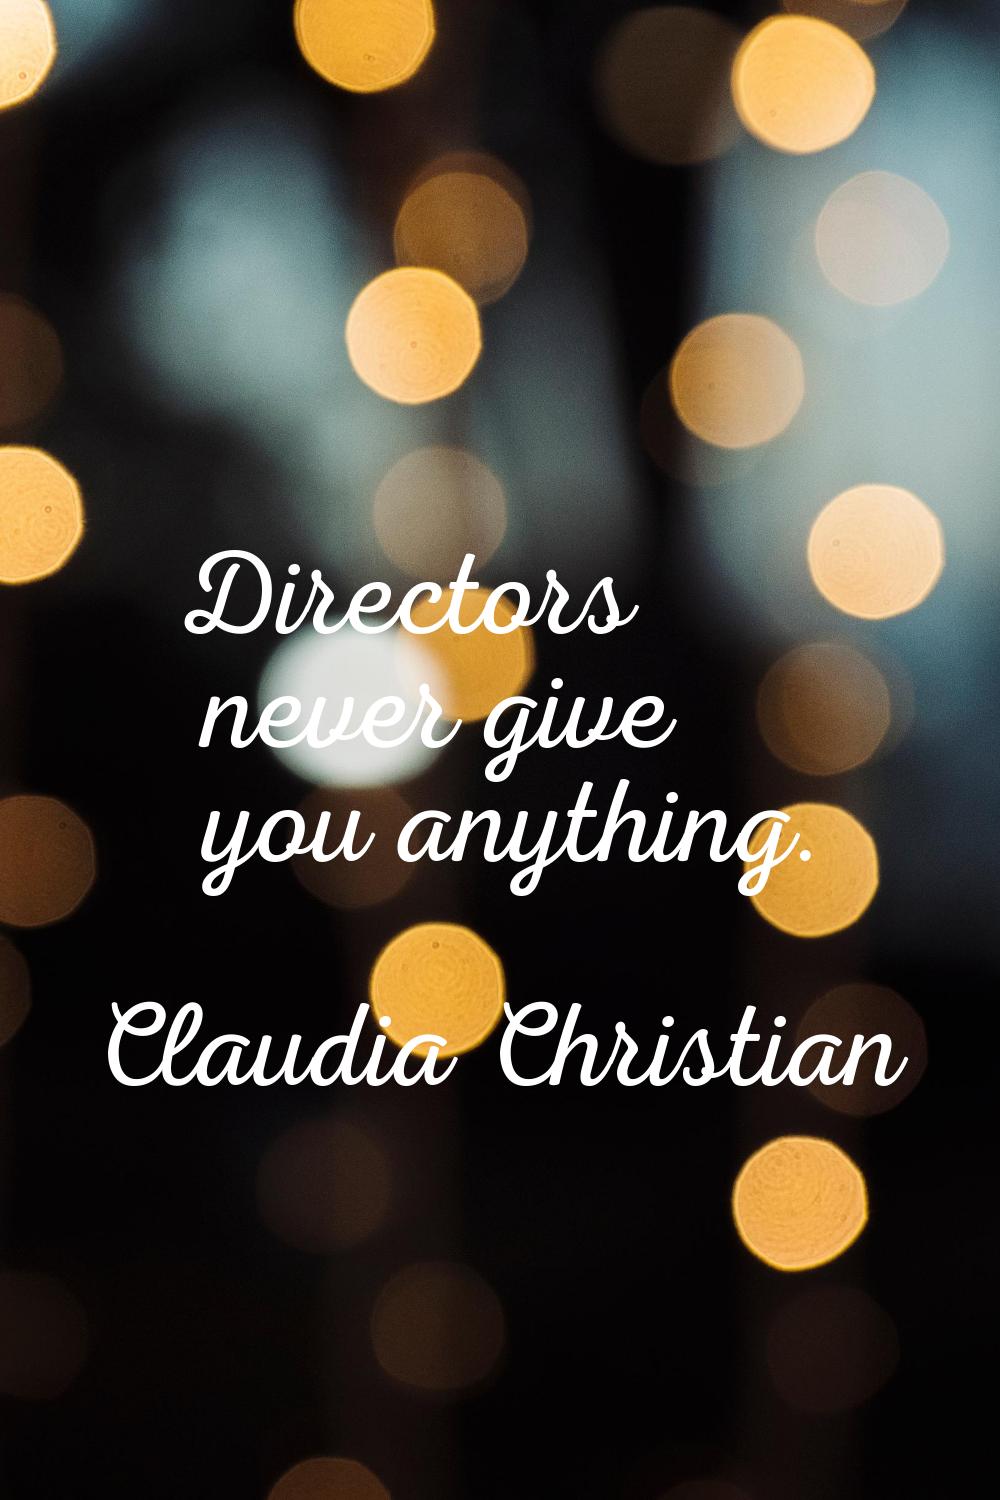 Directors never give you anything.